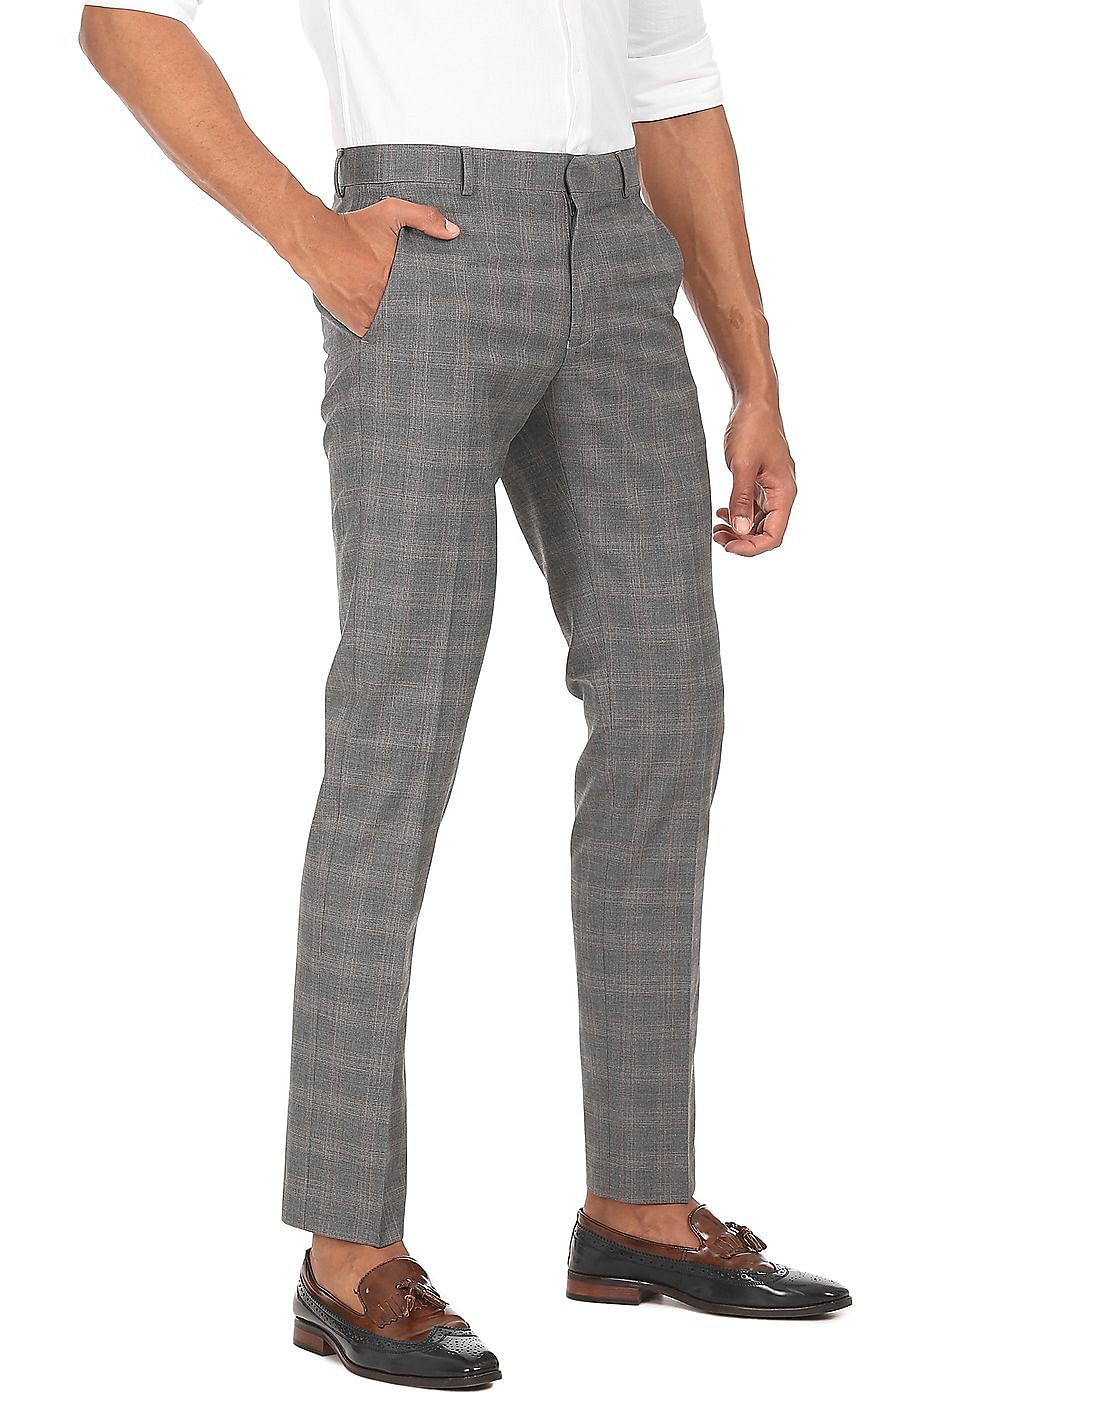 Buy latest Mens Trousers from Invictus online in India  Top Collection at  LooksGudin  Looksgudin